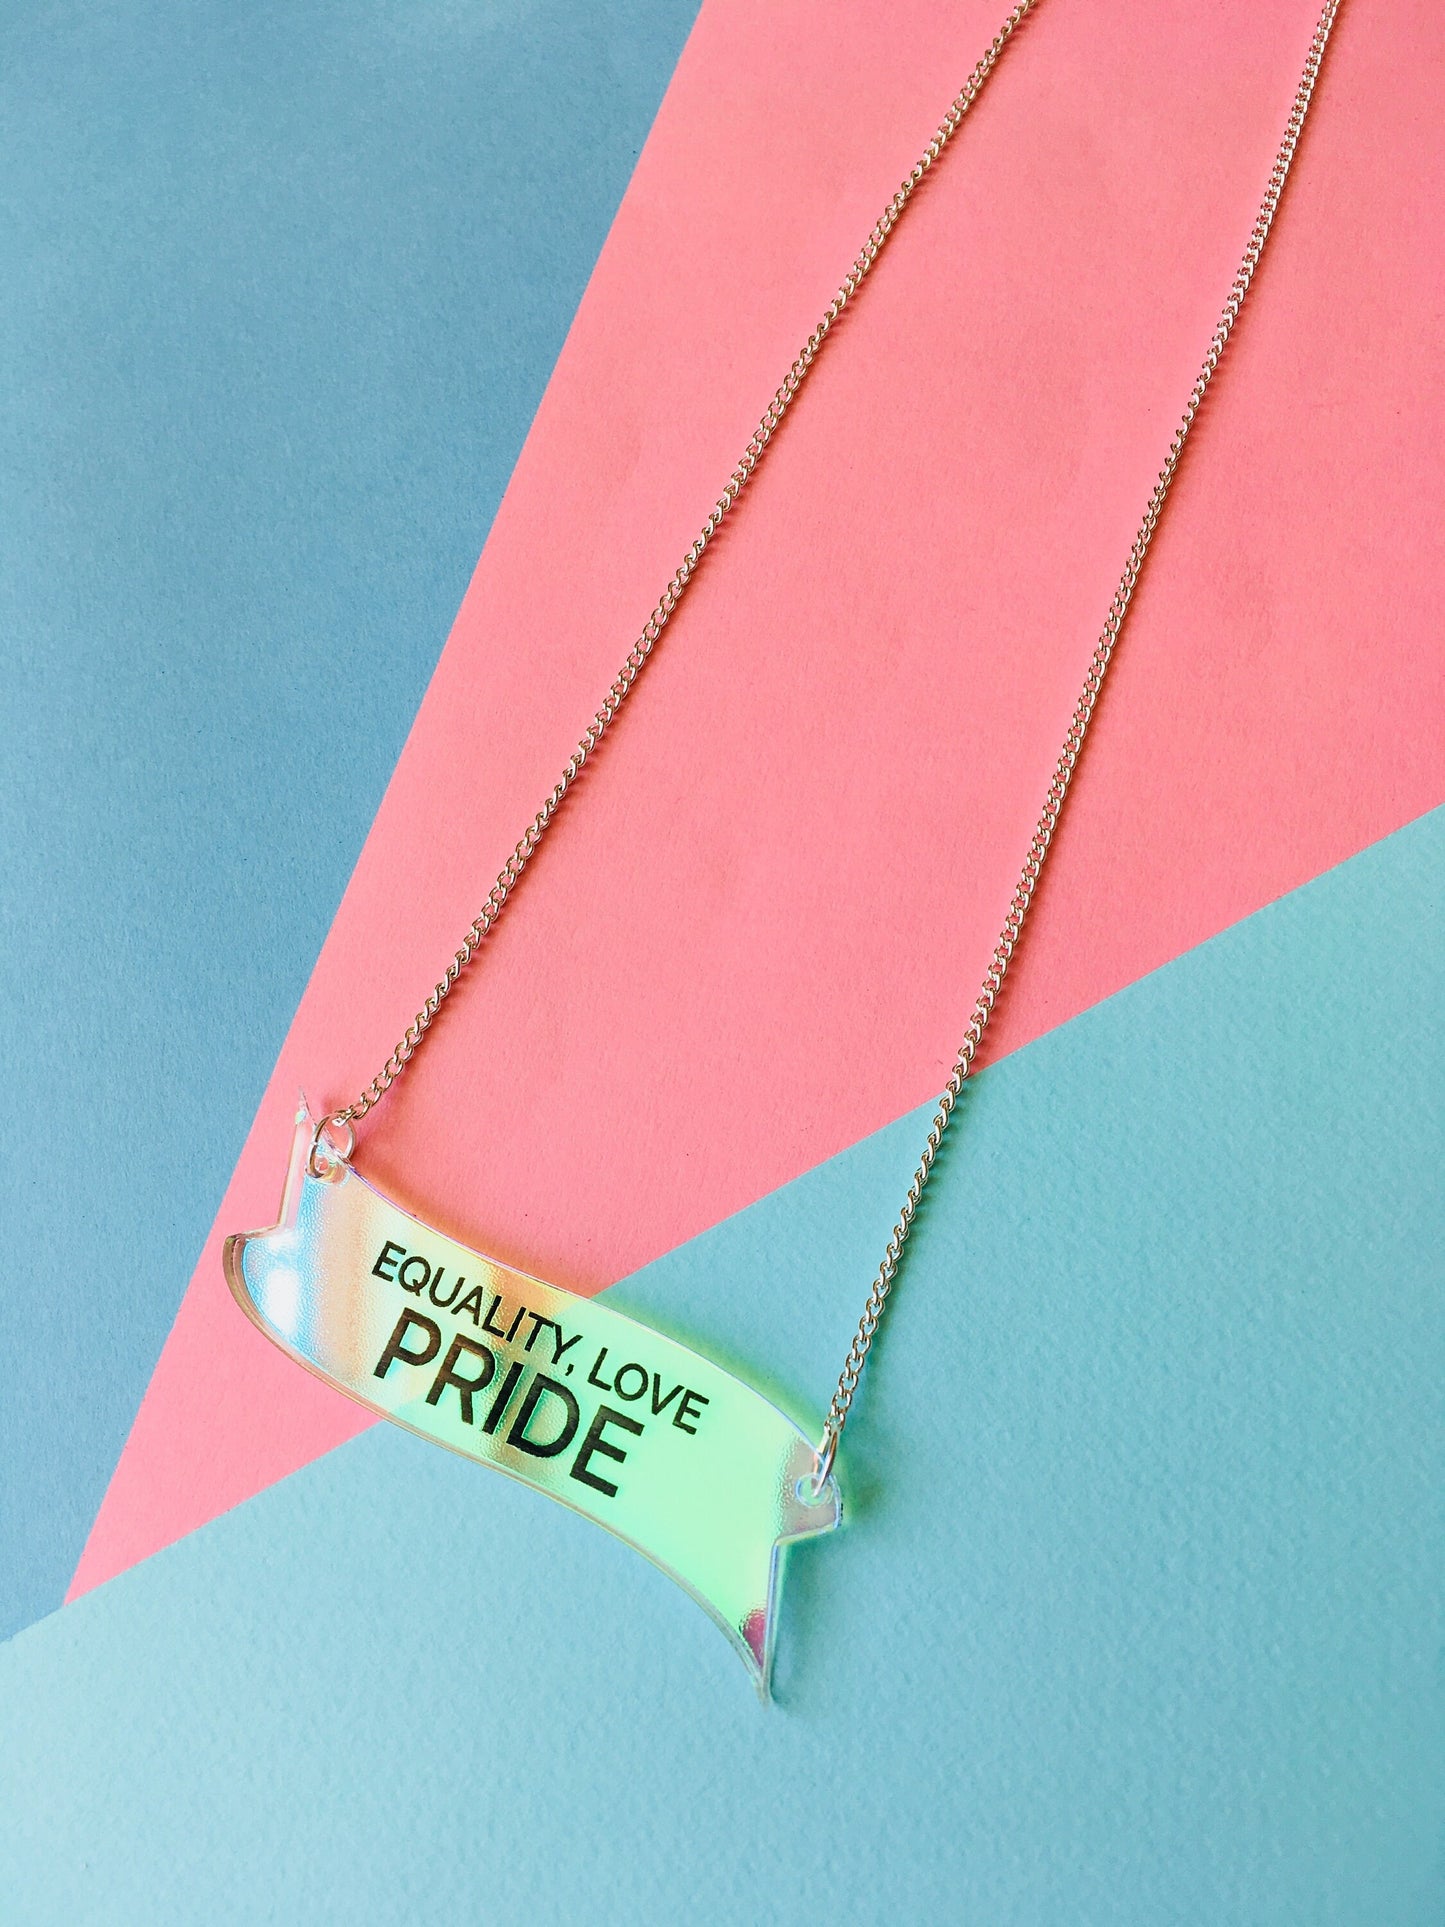 Equality Love Pride Necklace, Iridescent Jewellery